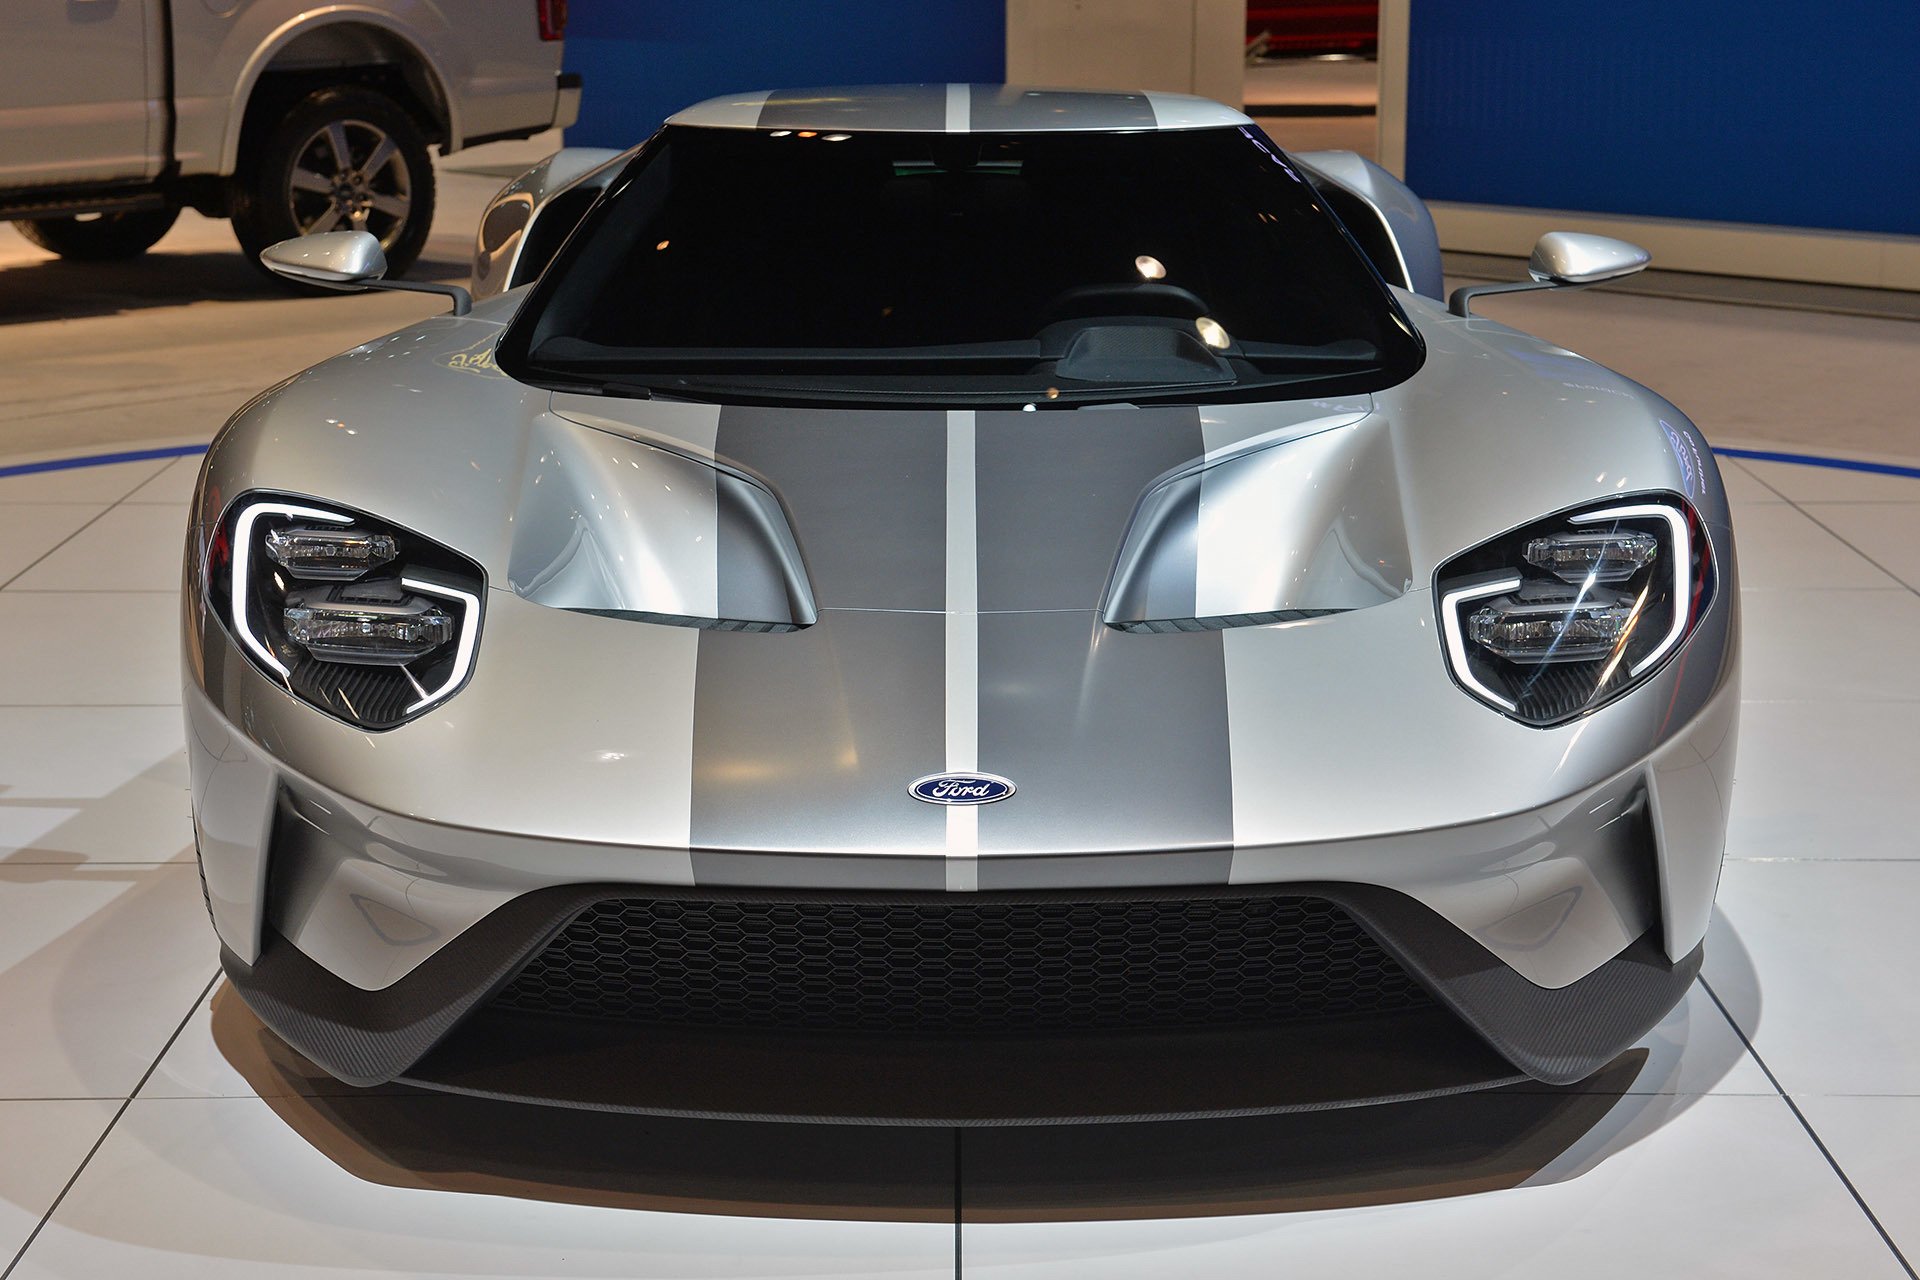 Топ машин 2023 год. Форд ГТ 2023. Ford gt 2017 Supercar. Ford gt 2016-2023. New Ford gt 2023.